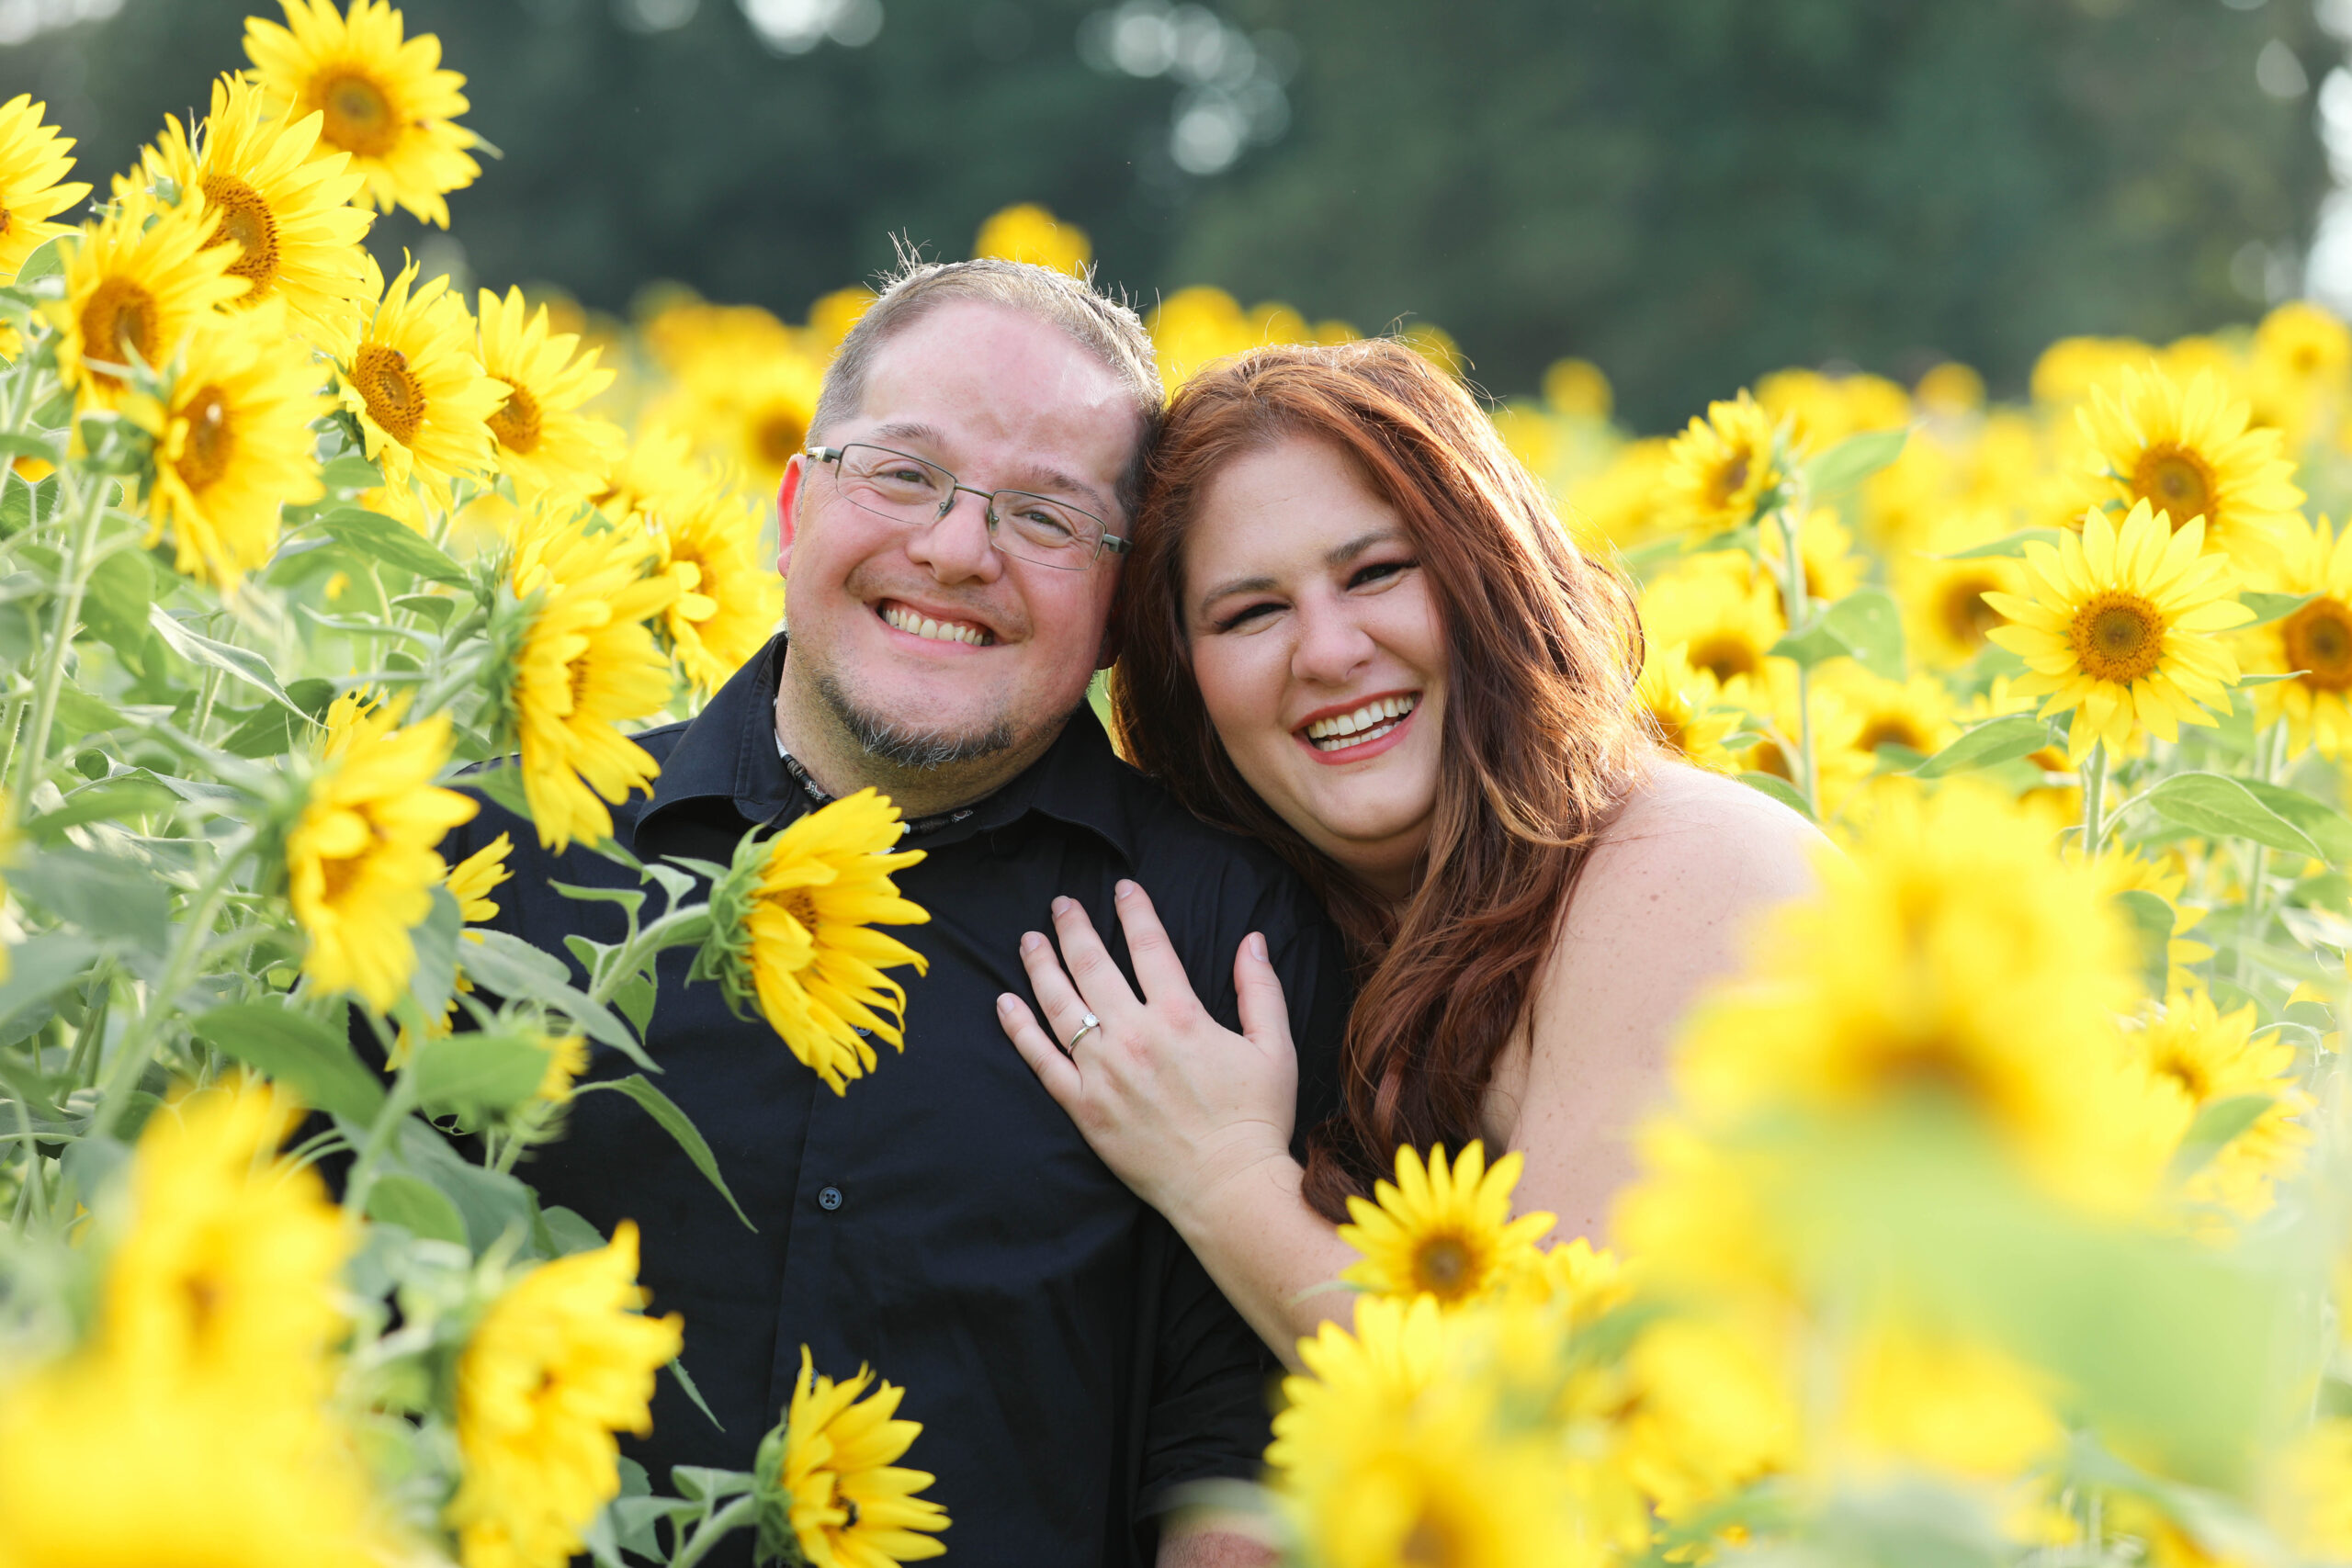 ENGAGEMENT | From Football to Sunflowers | Harlow’s Photography